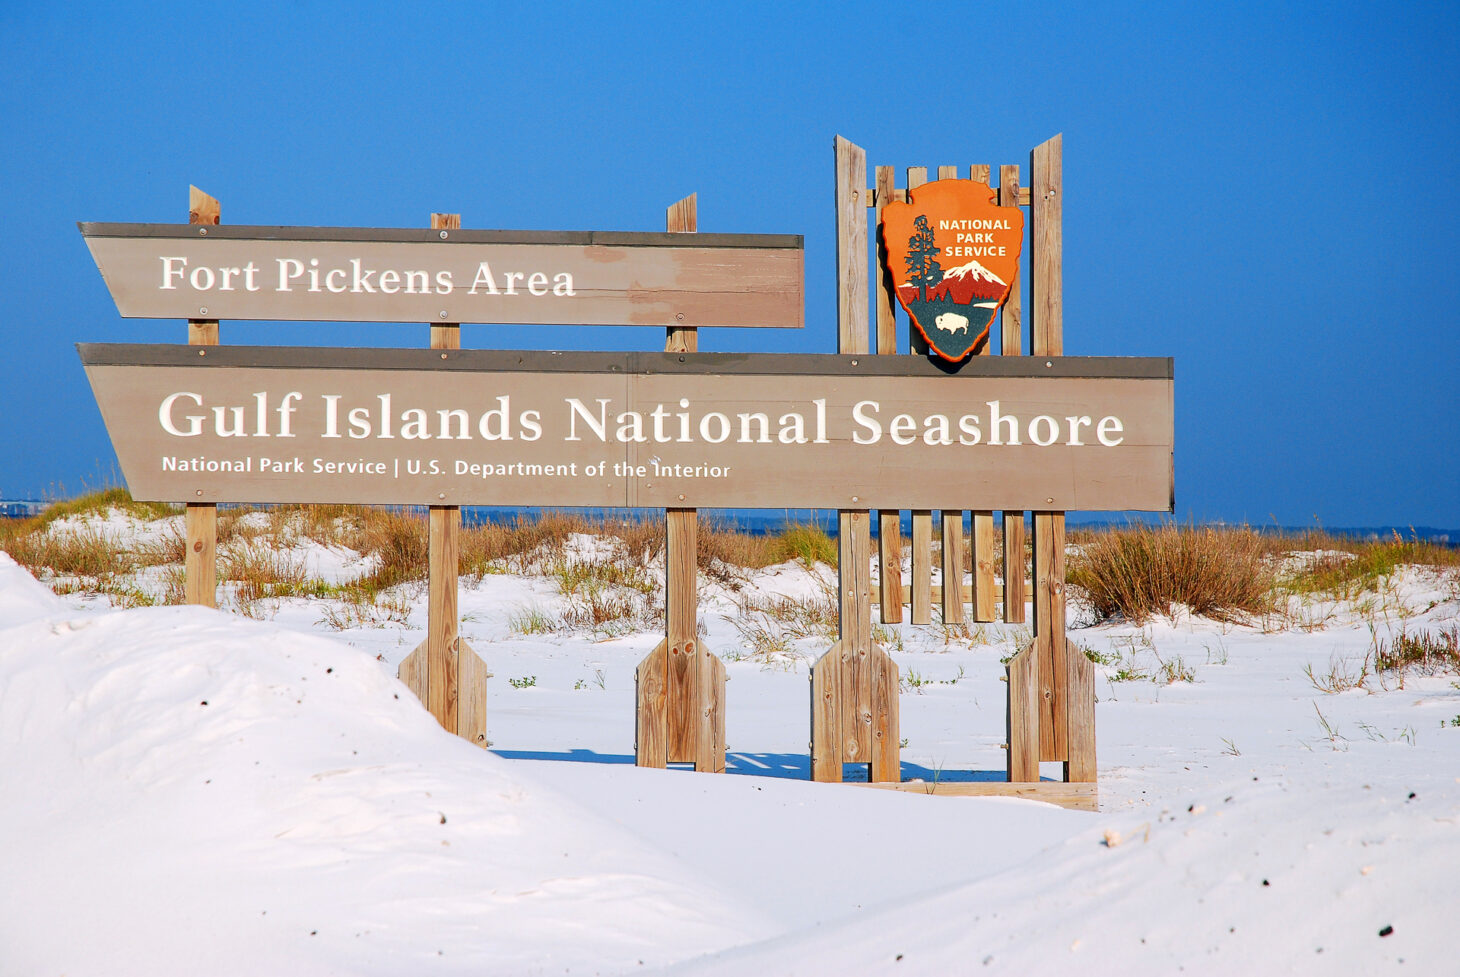 National Park Service sign that reads "Fort Pickens Area: Gulf Islands National Seashore" set in the sand at beach